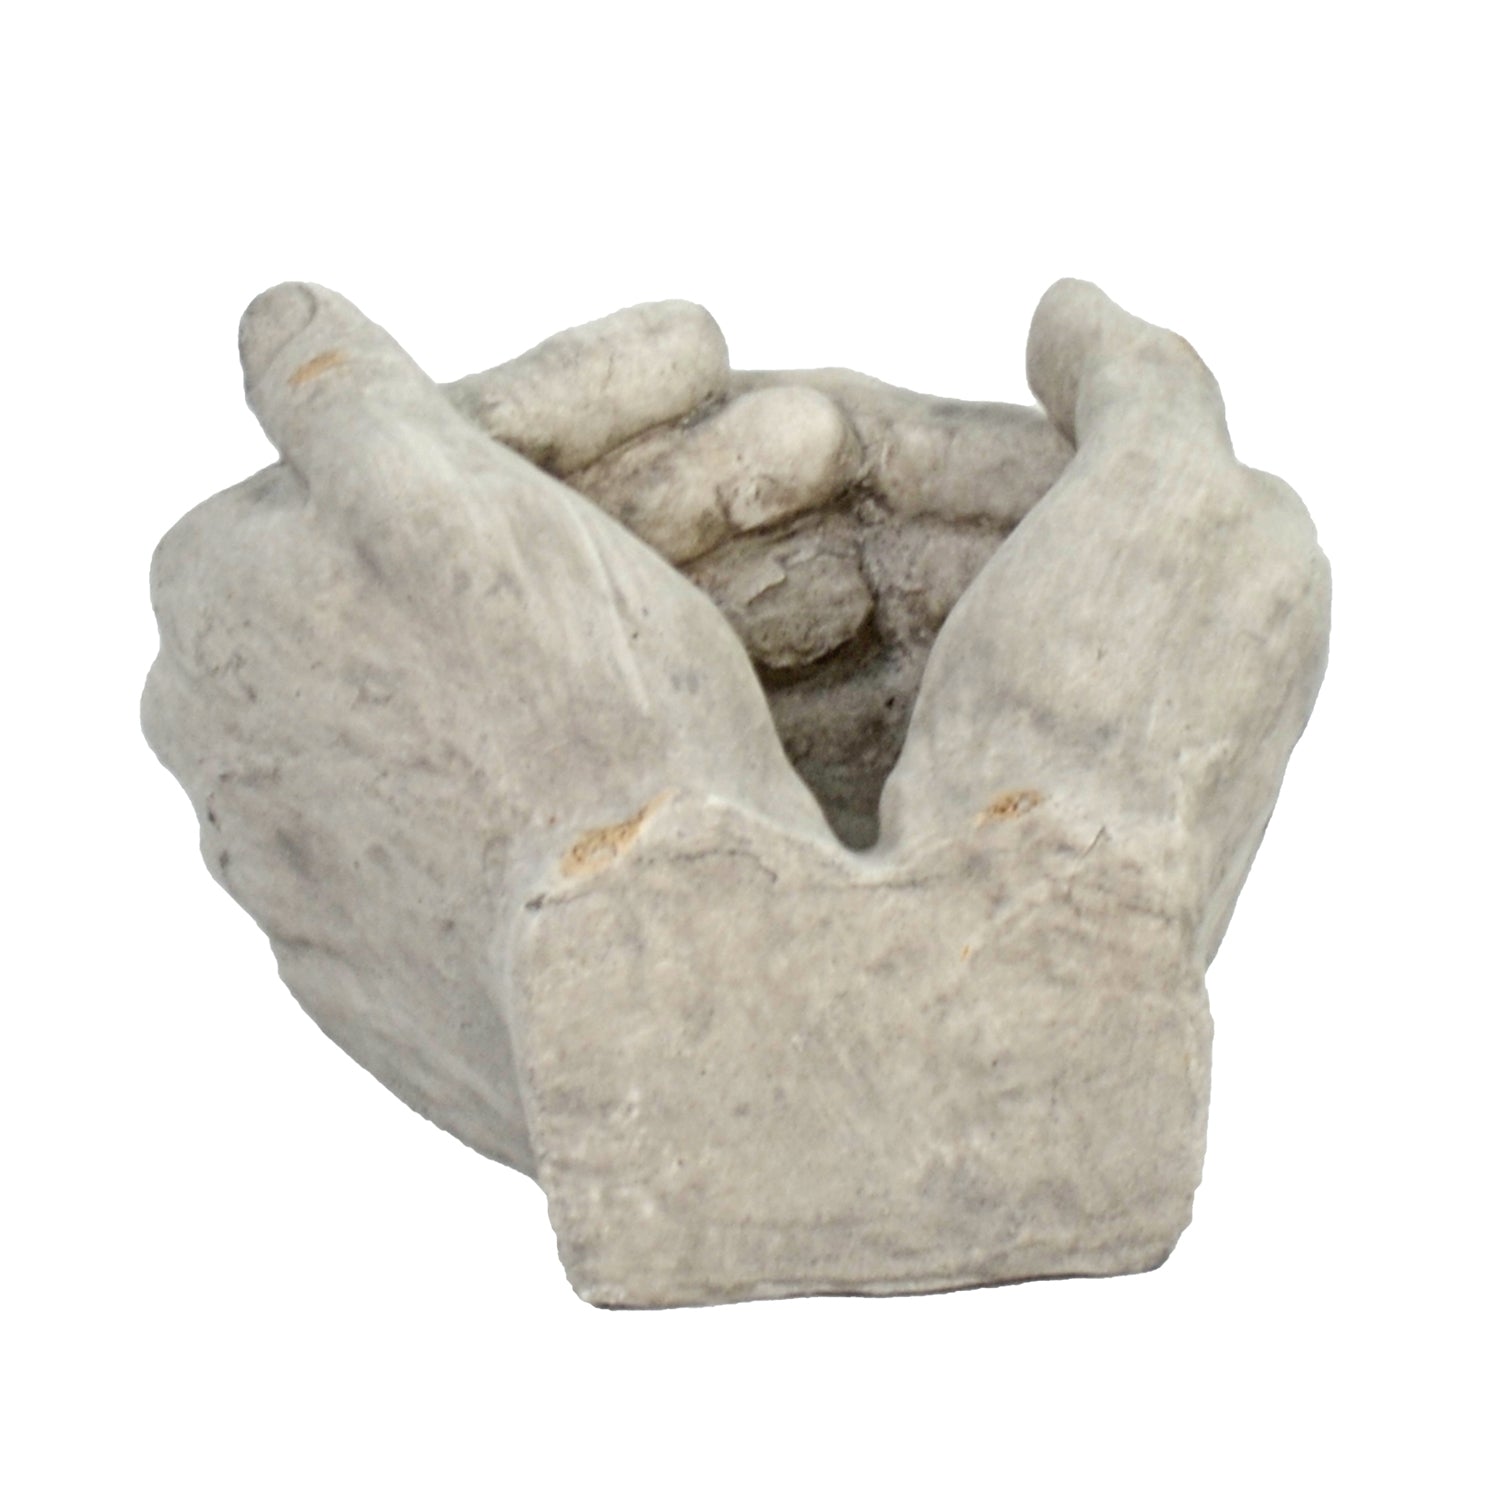 Solstice Sculptures Cupped Hands Planter 19cm Weathered Stone Effect Statues Solstice Sculptures   